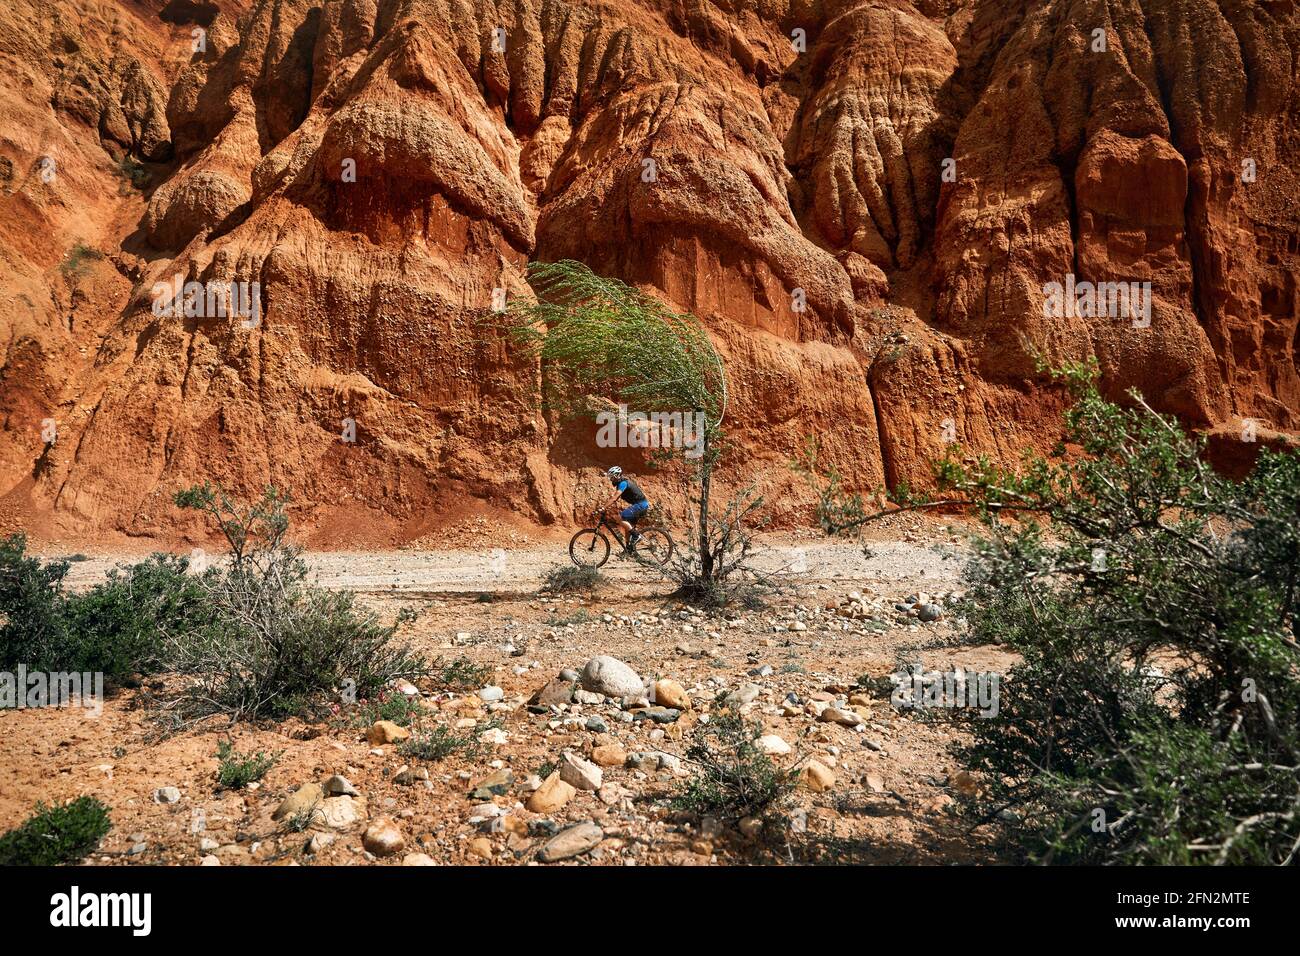 Rider rides his mountain bike in the desert Canyon wall near the tree at windy weather in Kazakhstan. Extreme Sport and outdoor recreation concept. Stock Photo